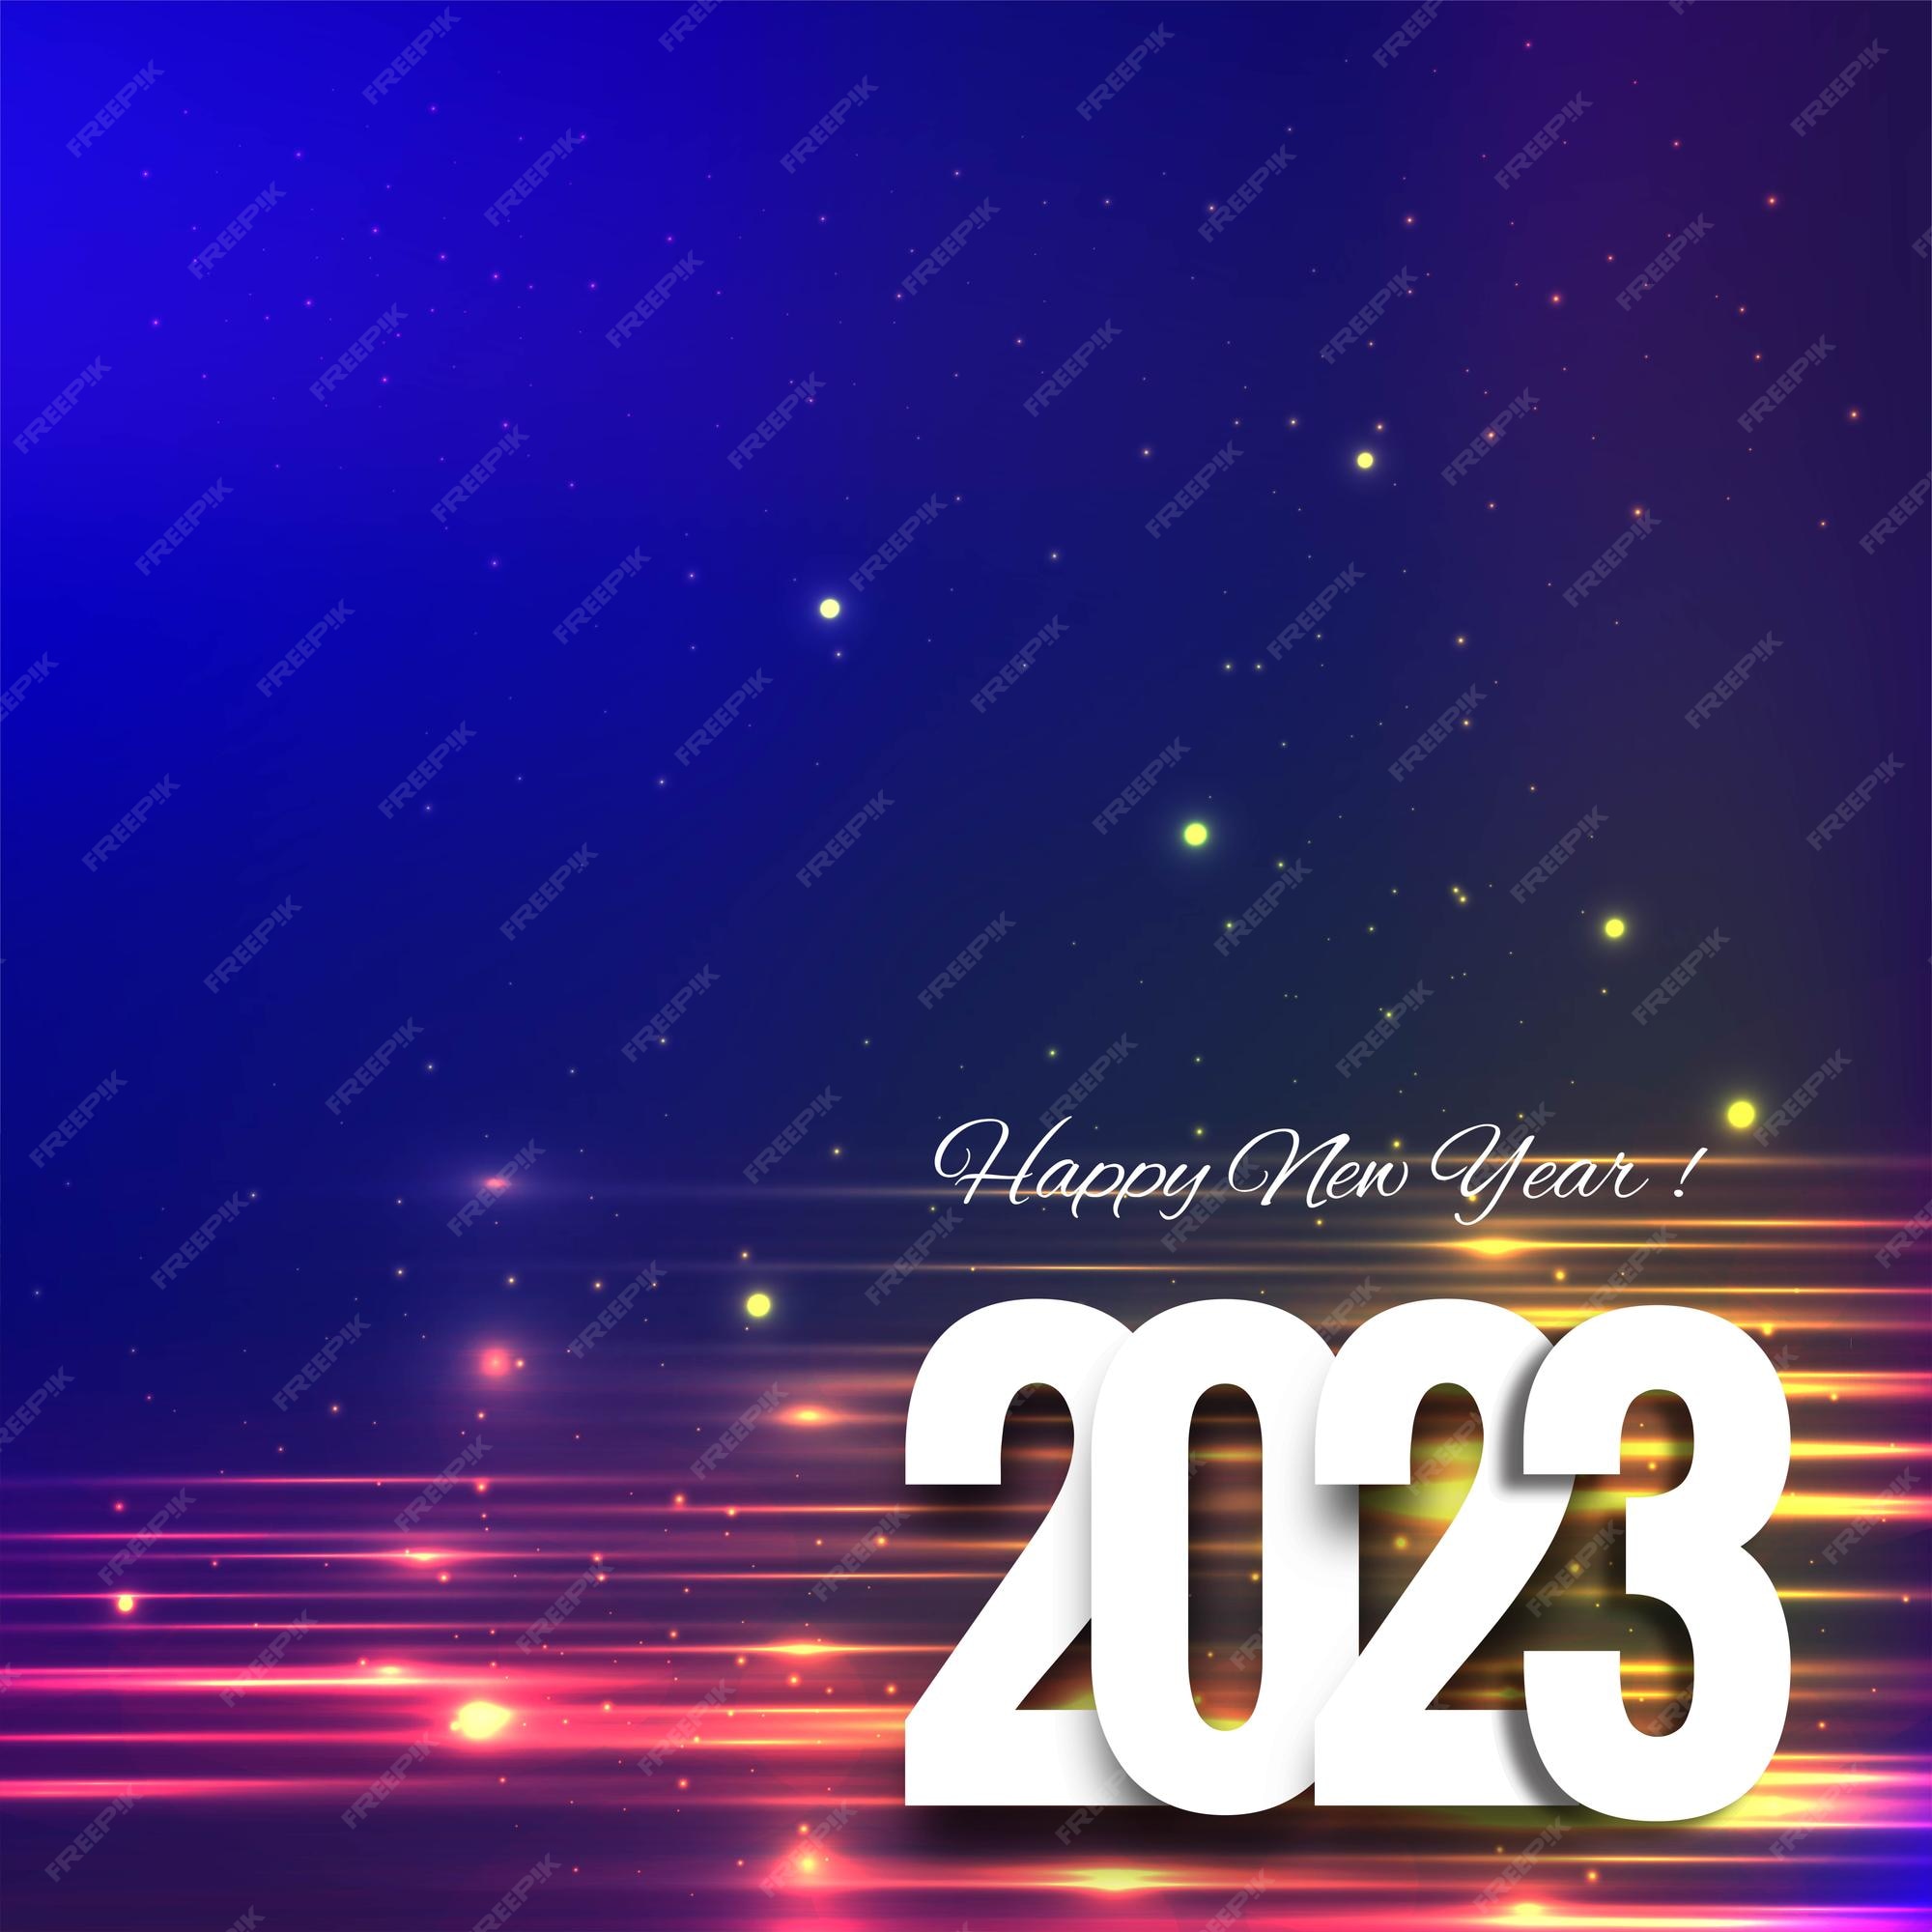 Free Vector | Greeting happy new year 2023 background